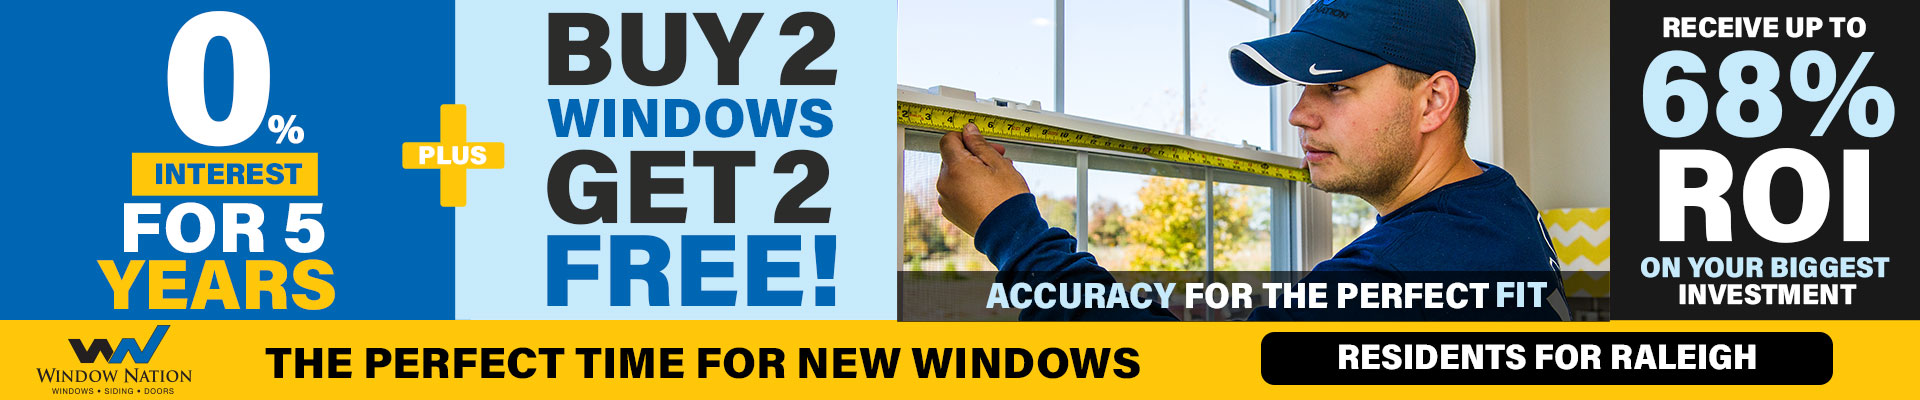 Buy 2 Windows, Get 2 Free | 0% Interest for 5 Years!